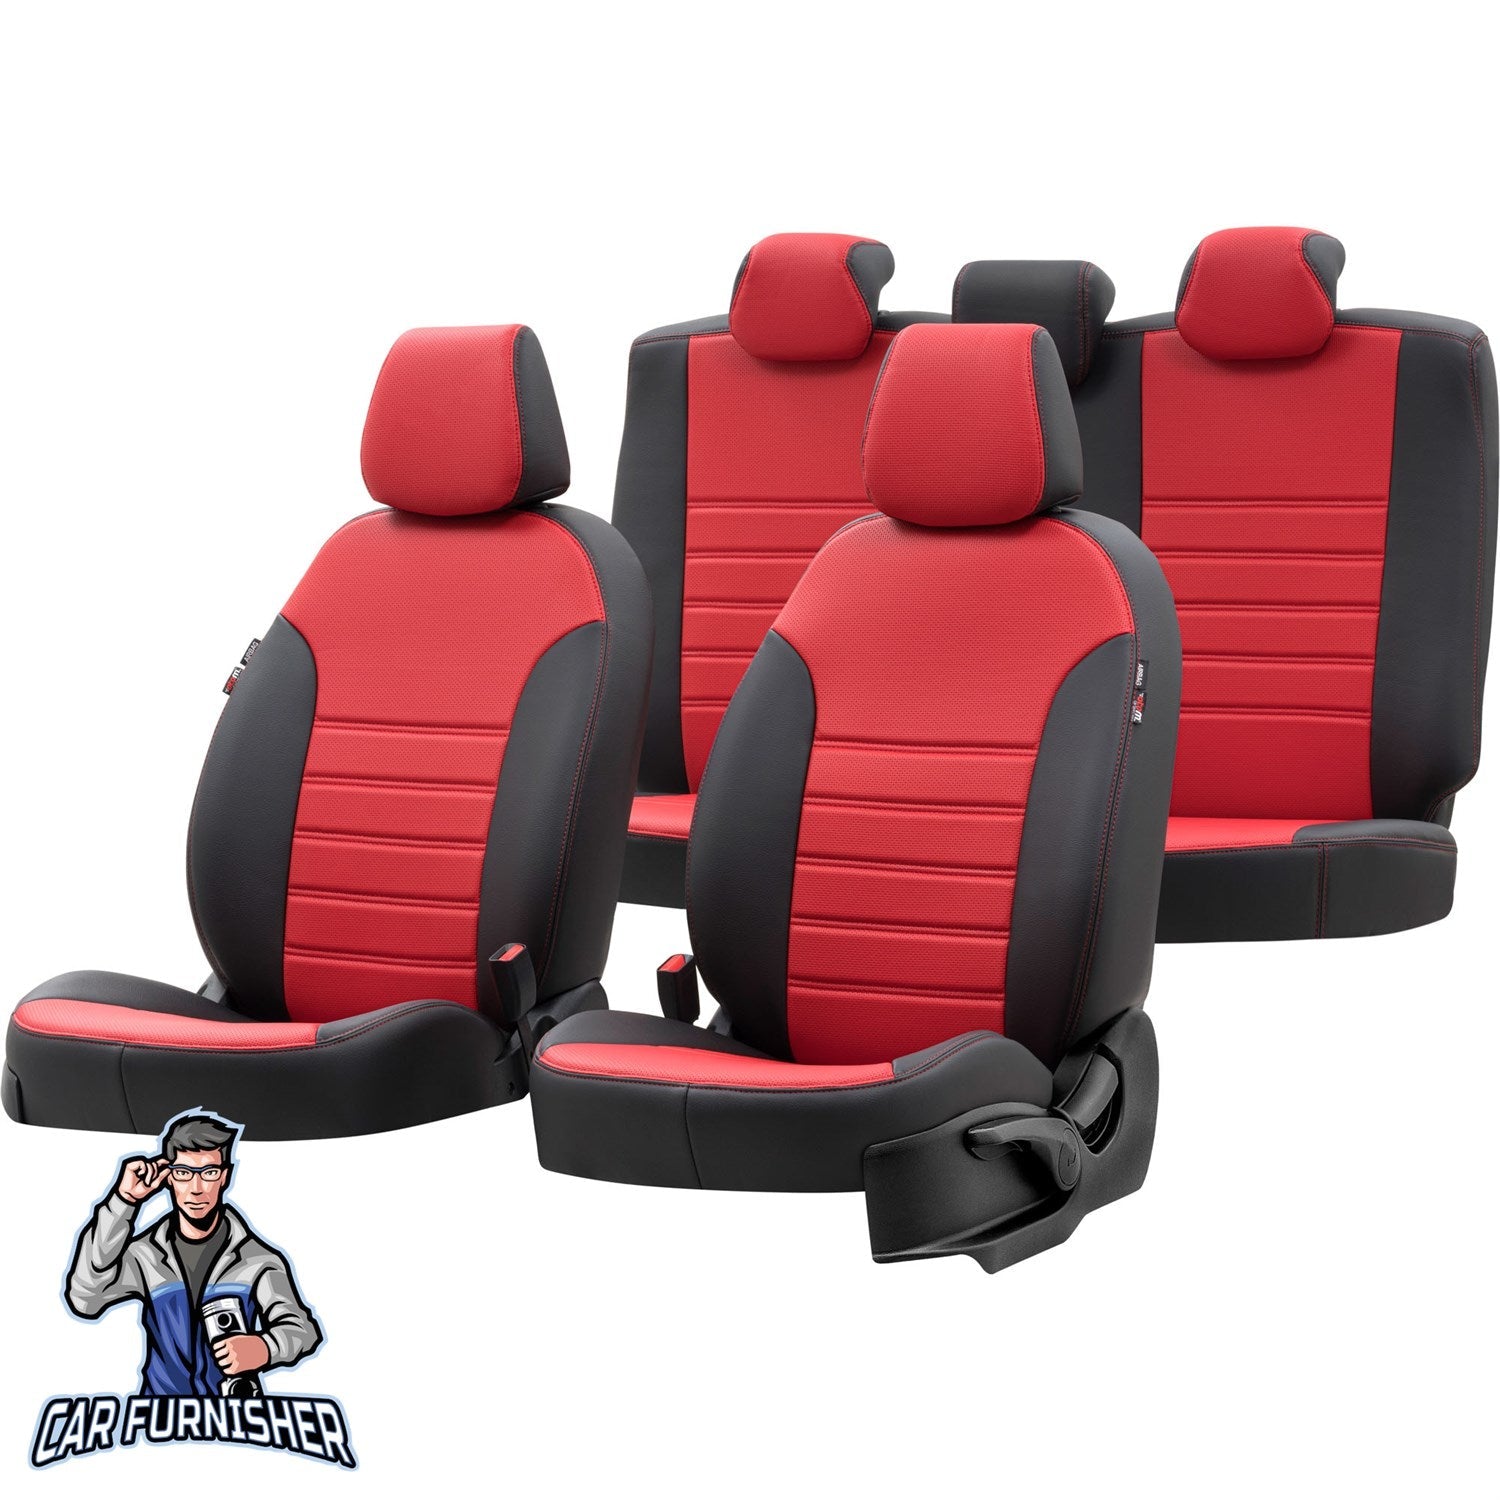 Kia Soul Seat Covers New York Leather Design Red Leather